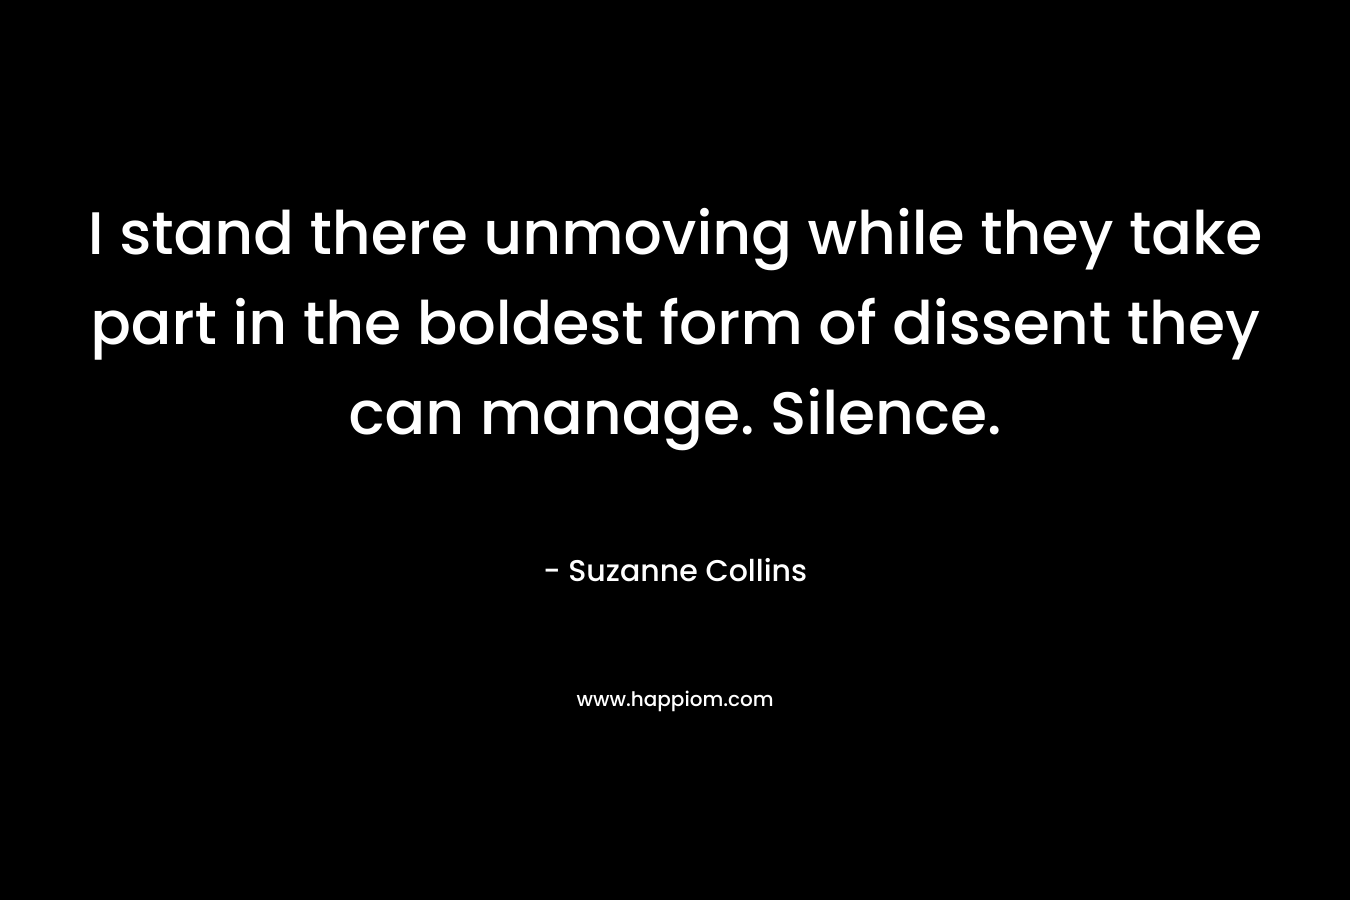 I stand there unmoving while they take part in the boldest form of dissent they can manage. Silence. – Suzanne Collins